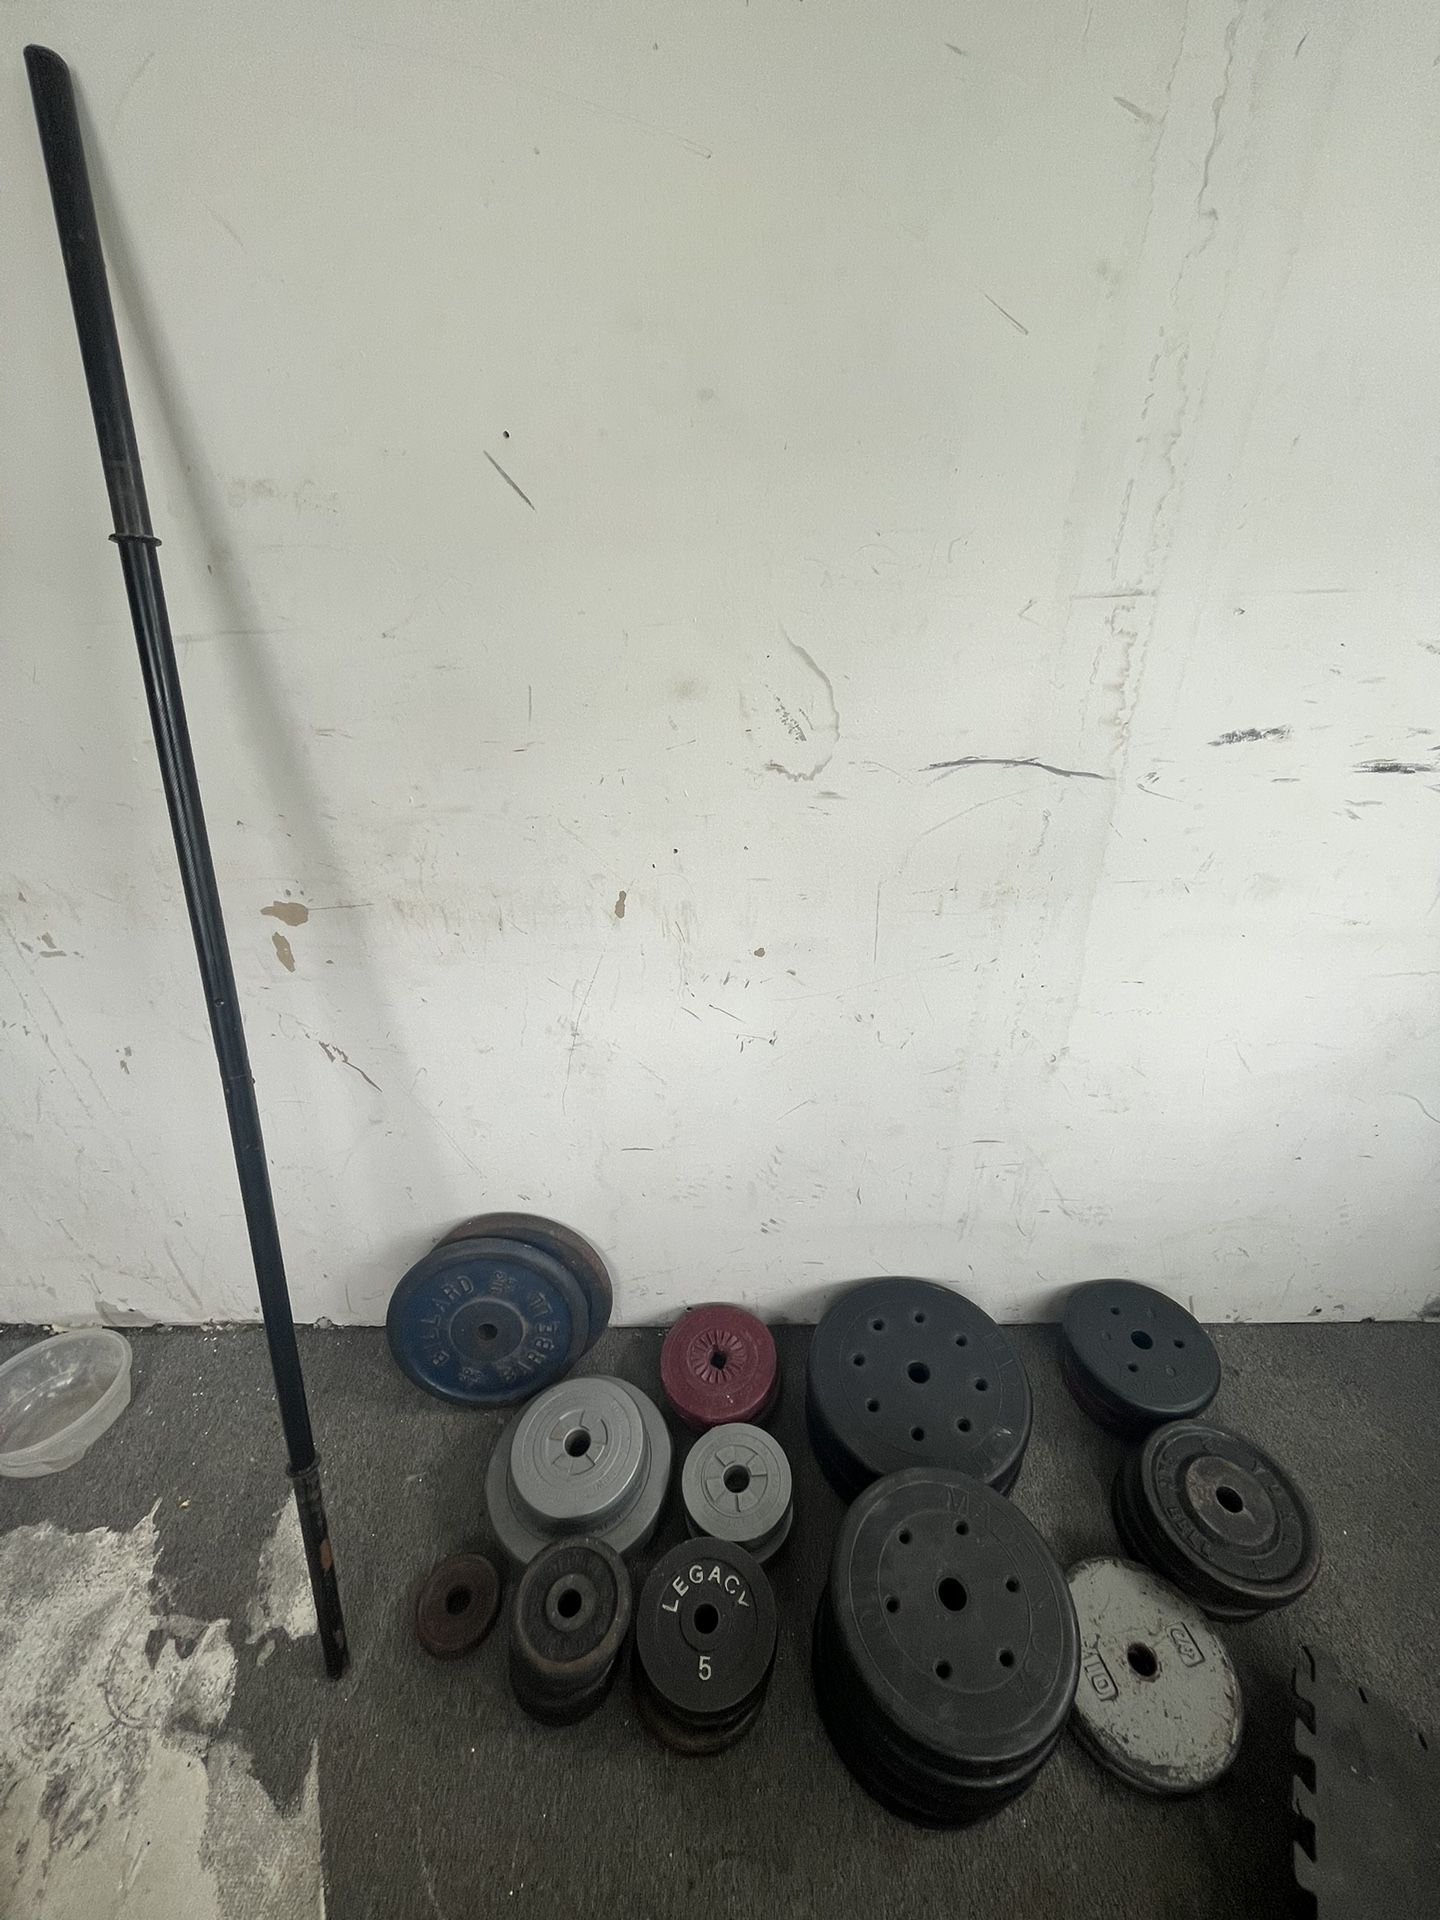 Used Weights 